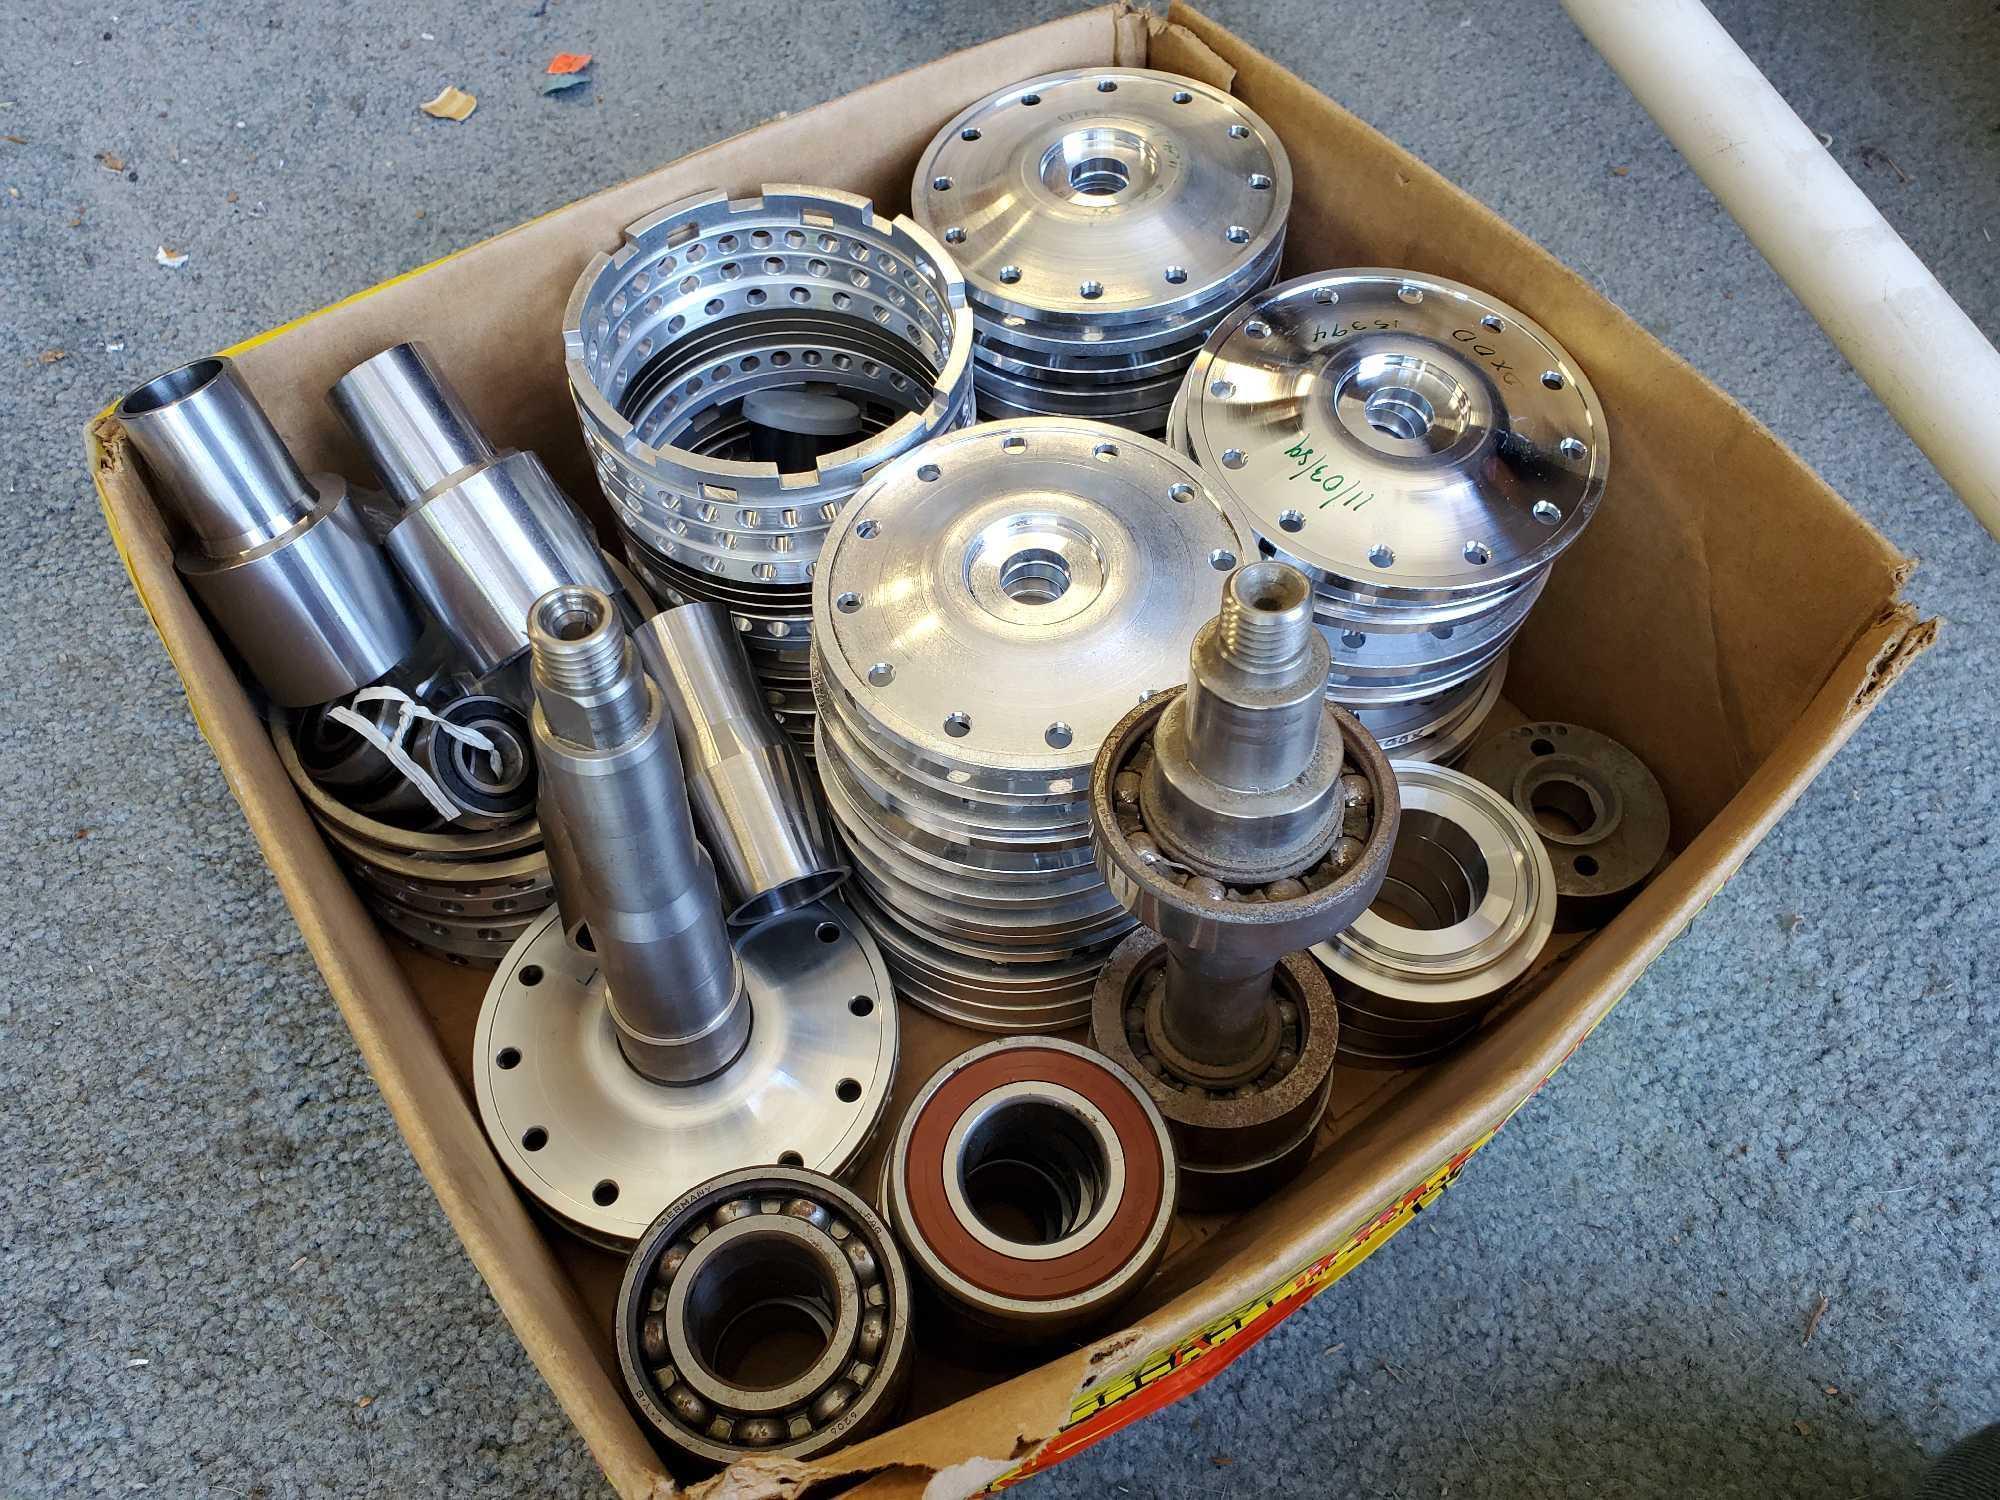 UNIDENTIFIED STAINLESS AND ALUMINUM PARTS